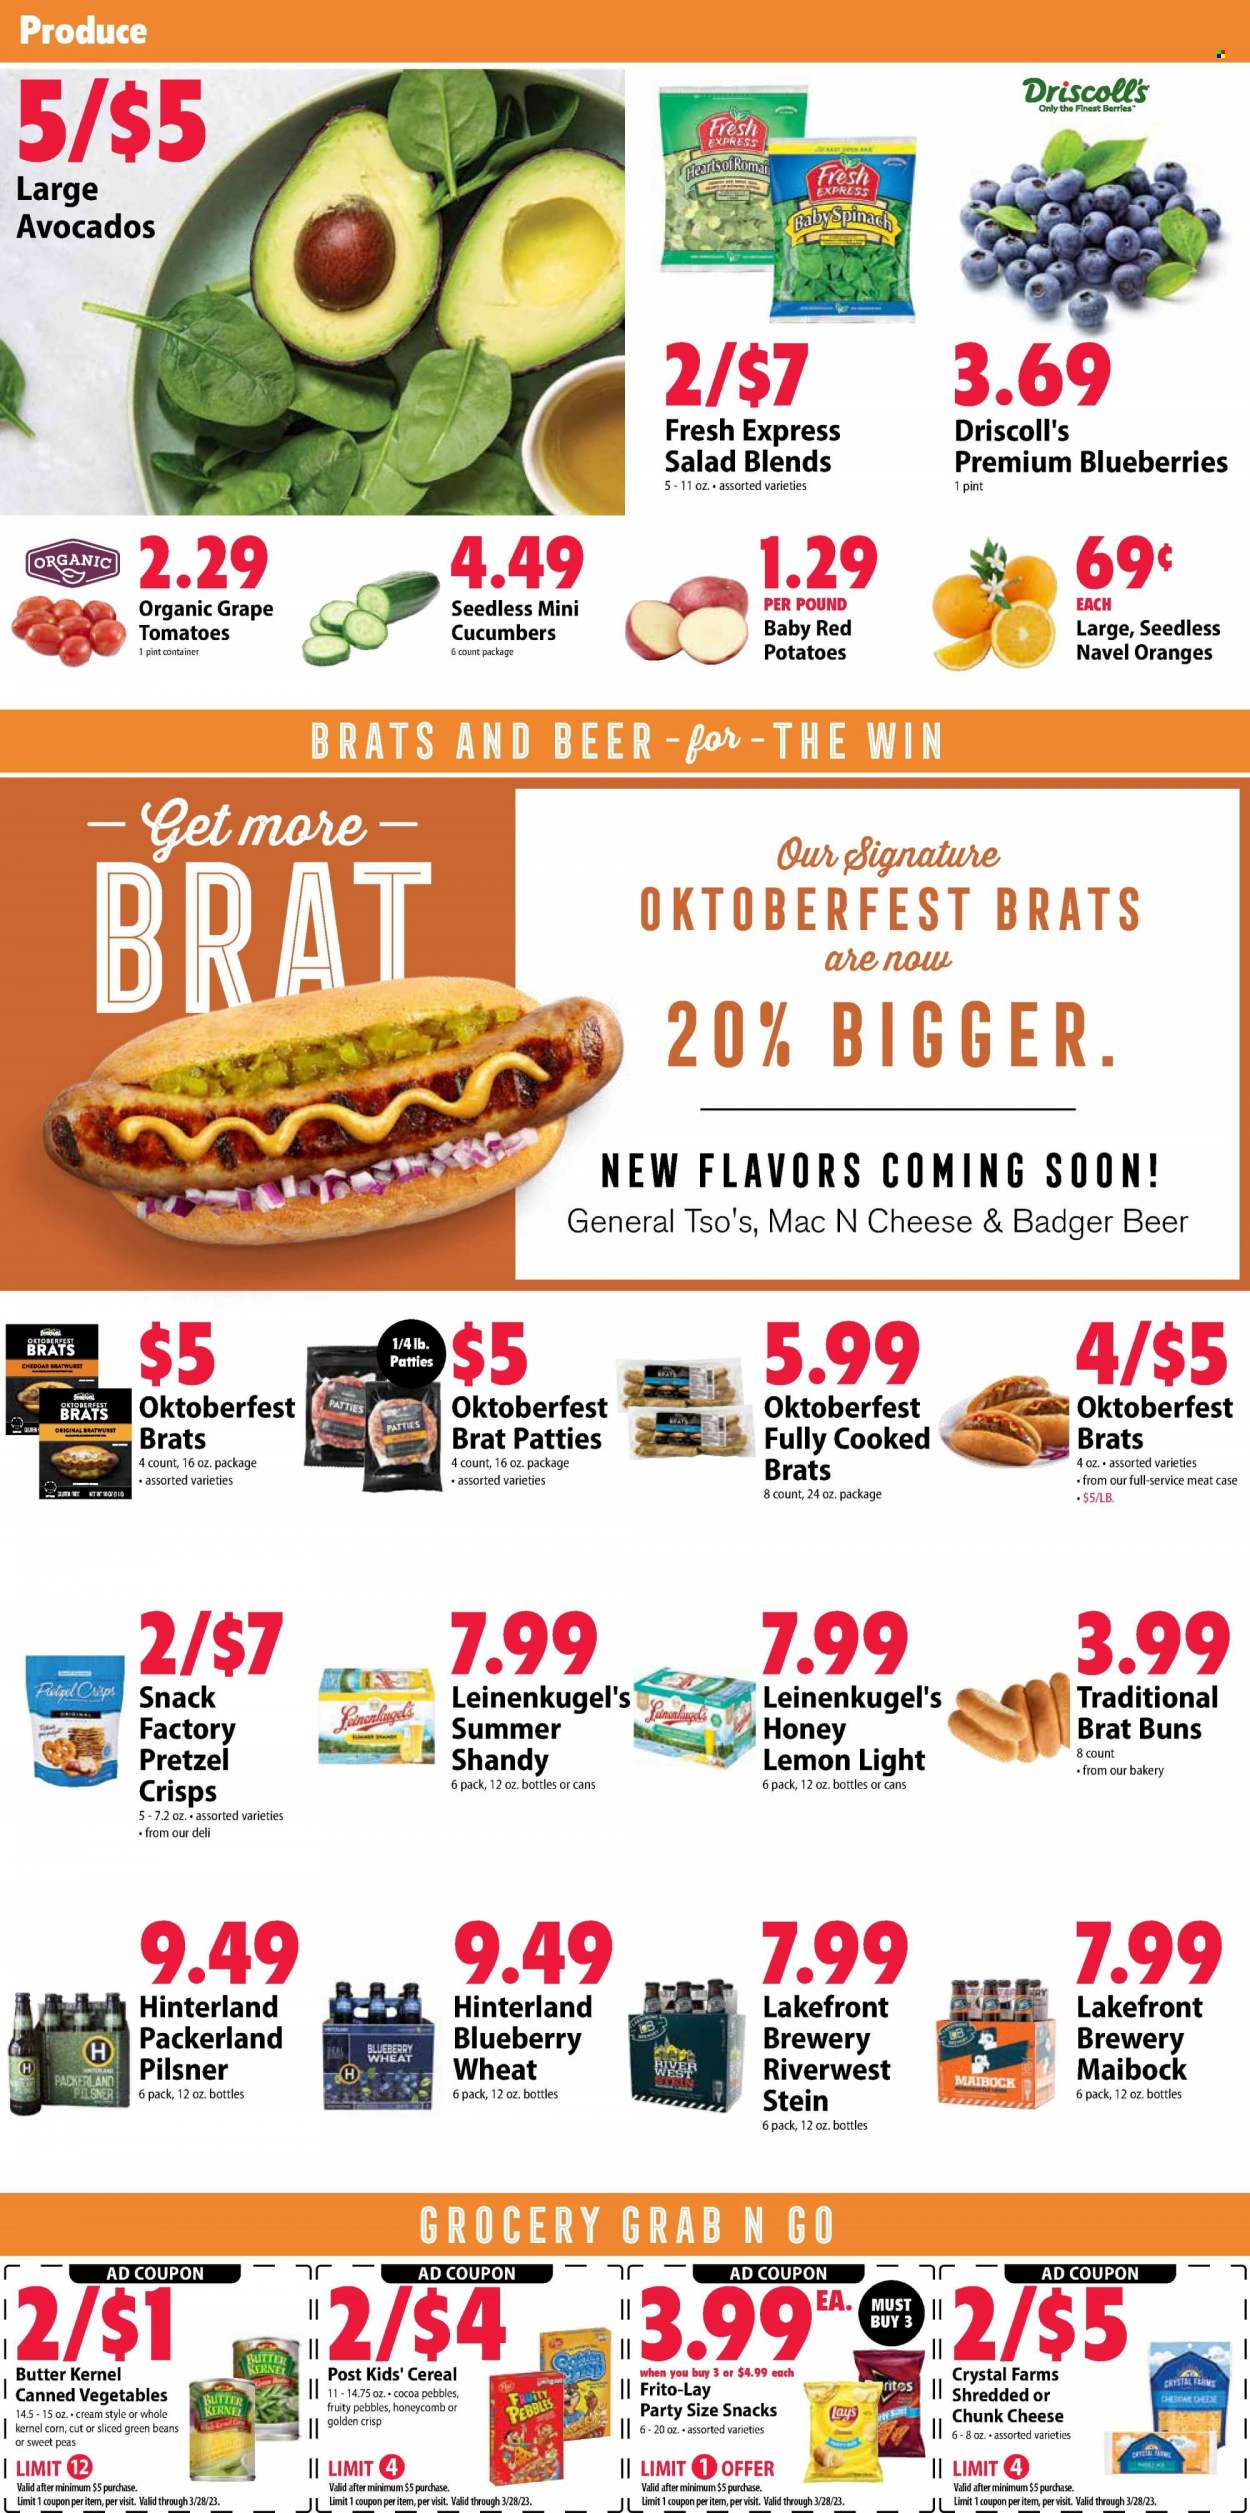 thumbnail - Festival Foods Flyer - 03/22/2023 - 03/28/2023 - Sales products - buns, beans, corn, cucumber, green beans, tomatoes, potatoes, peas, salad, red potatoes, avocado, blueberries, oranges, bratwurst, cheddar, chunk cheese, butter, snack, Lay’s, Frito-Lay, pretzel crisps, canned vegetables, cereals, Fruity Pebbles, beer, Leinenkugel's, navel oranges. Page 6.